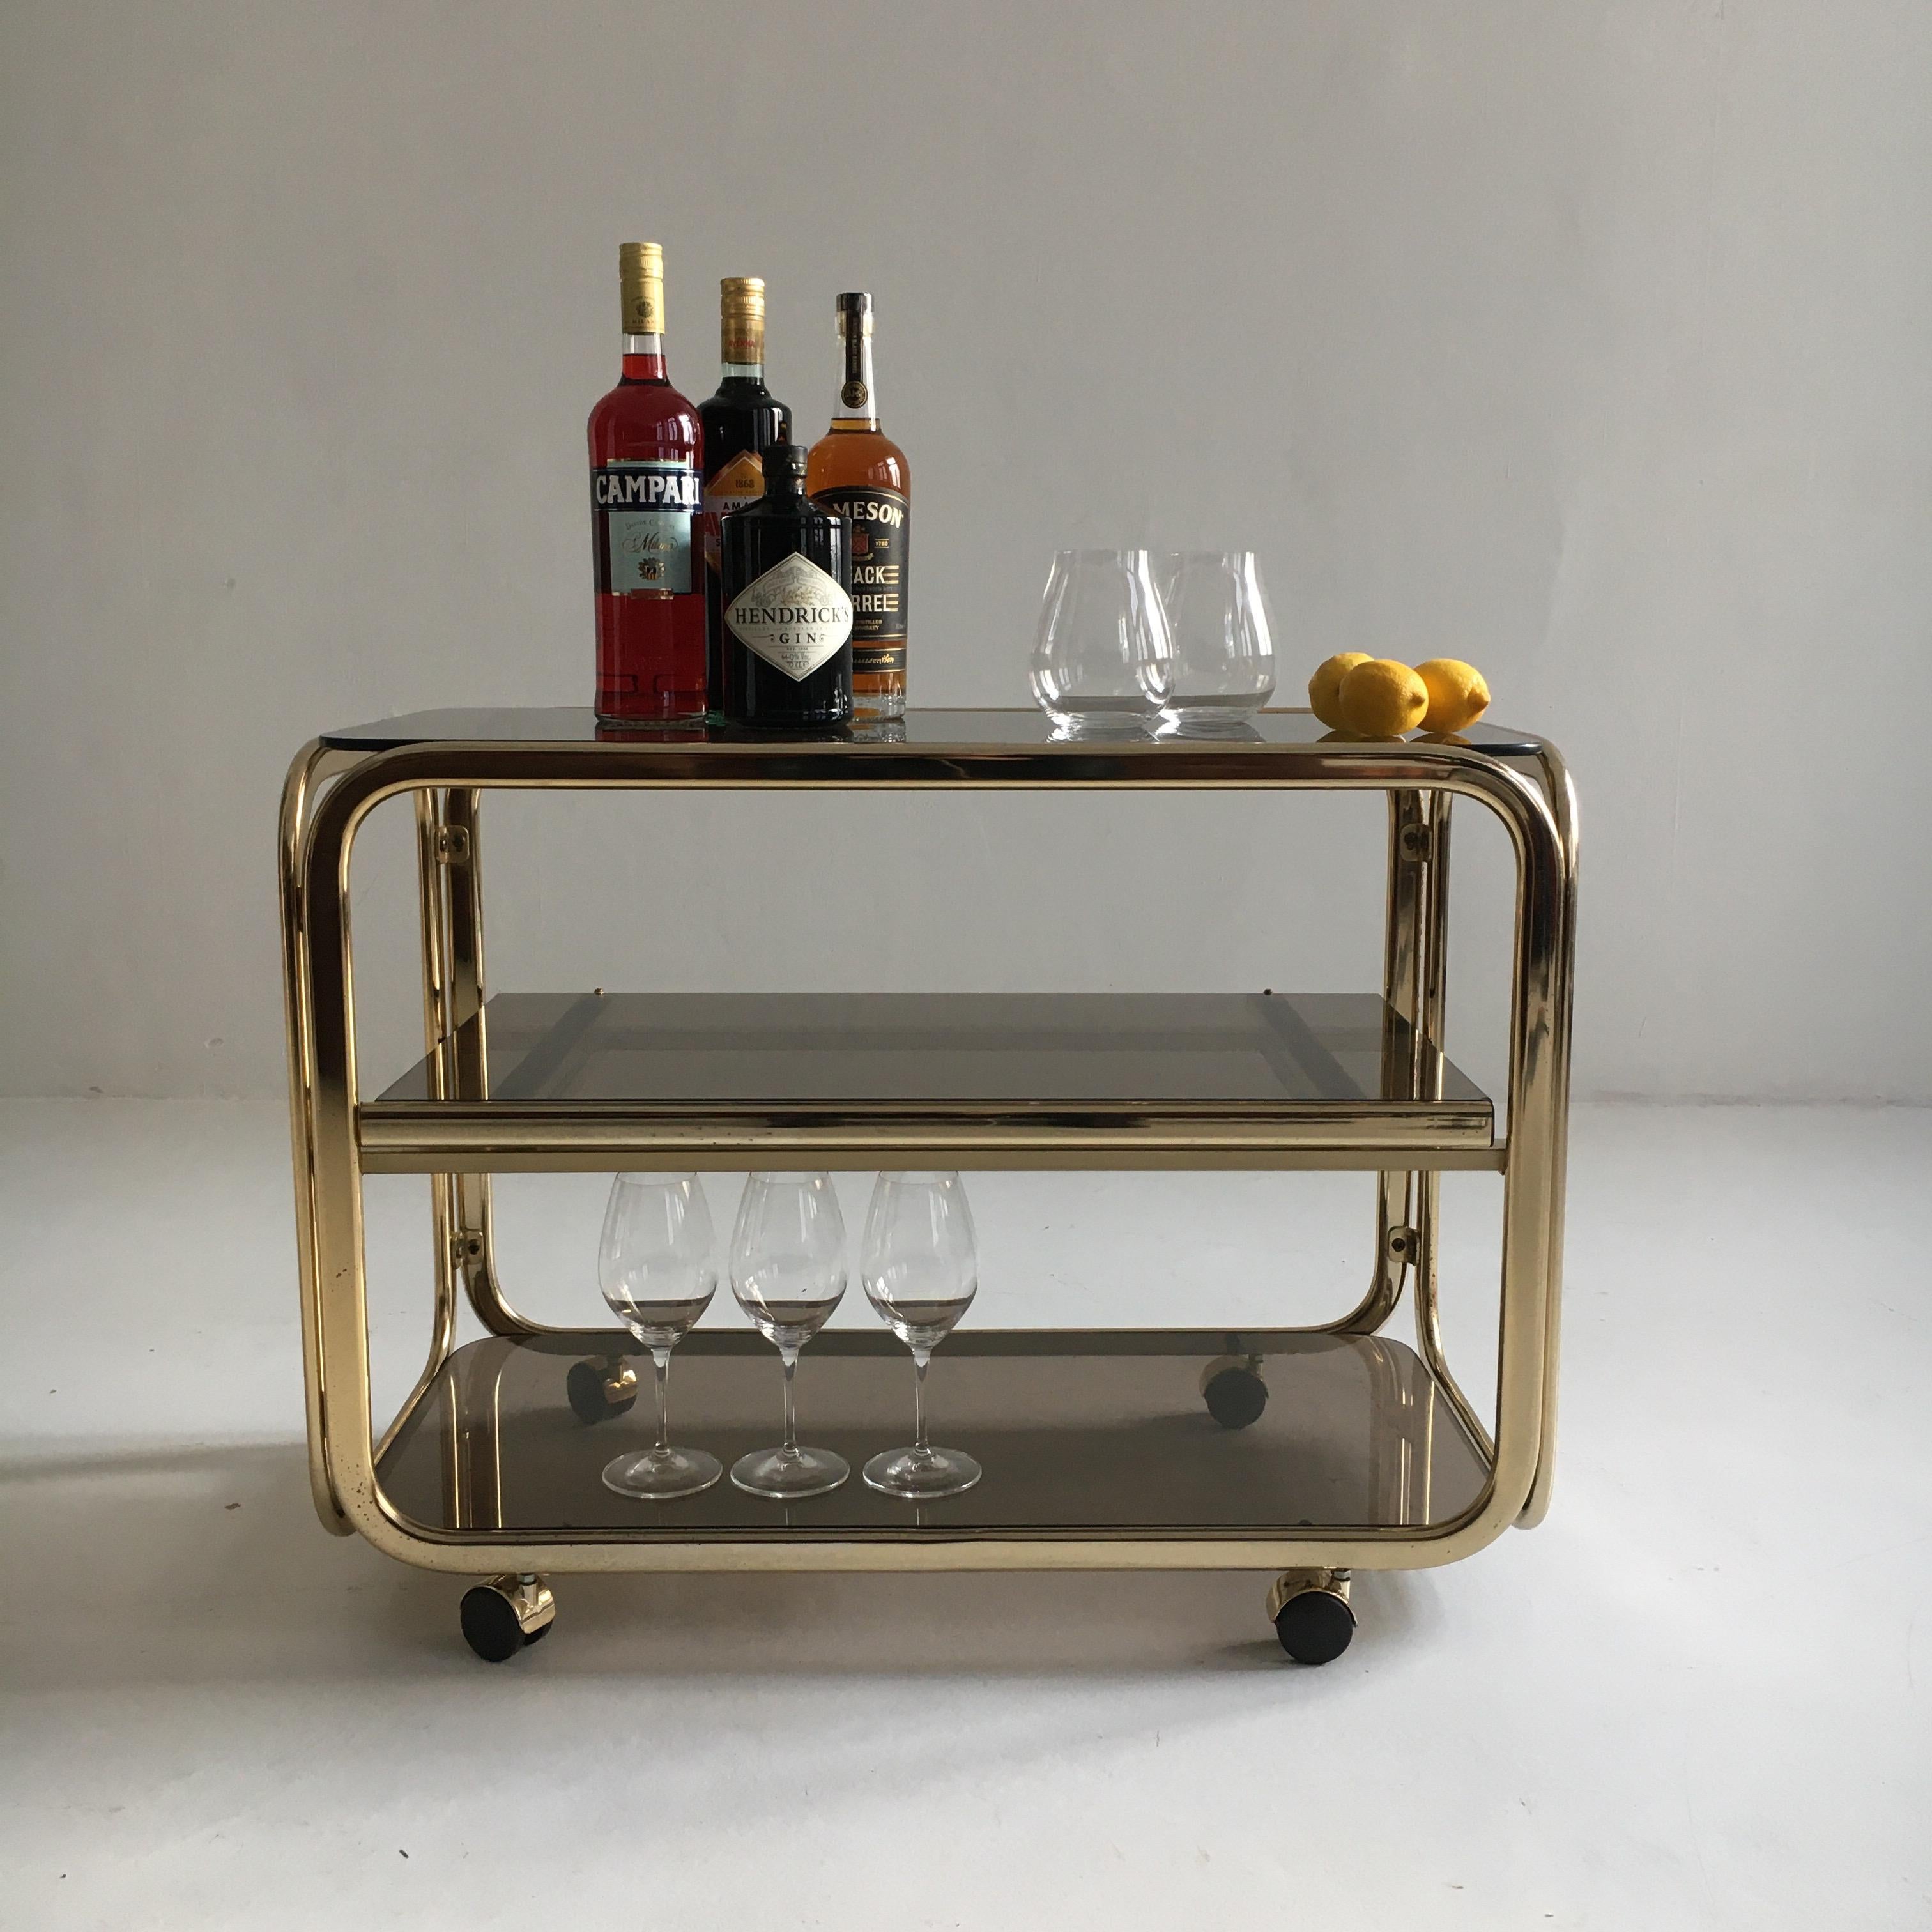 Vintage brass-plated bar cart table brown smoked glass plates by Morex, 1970s.